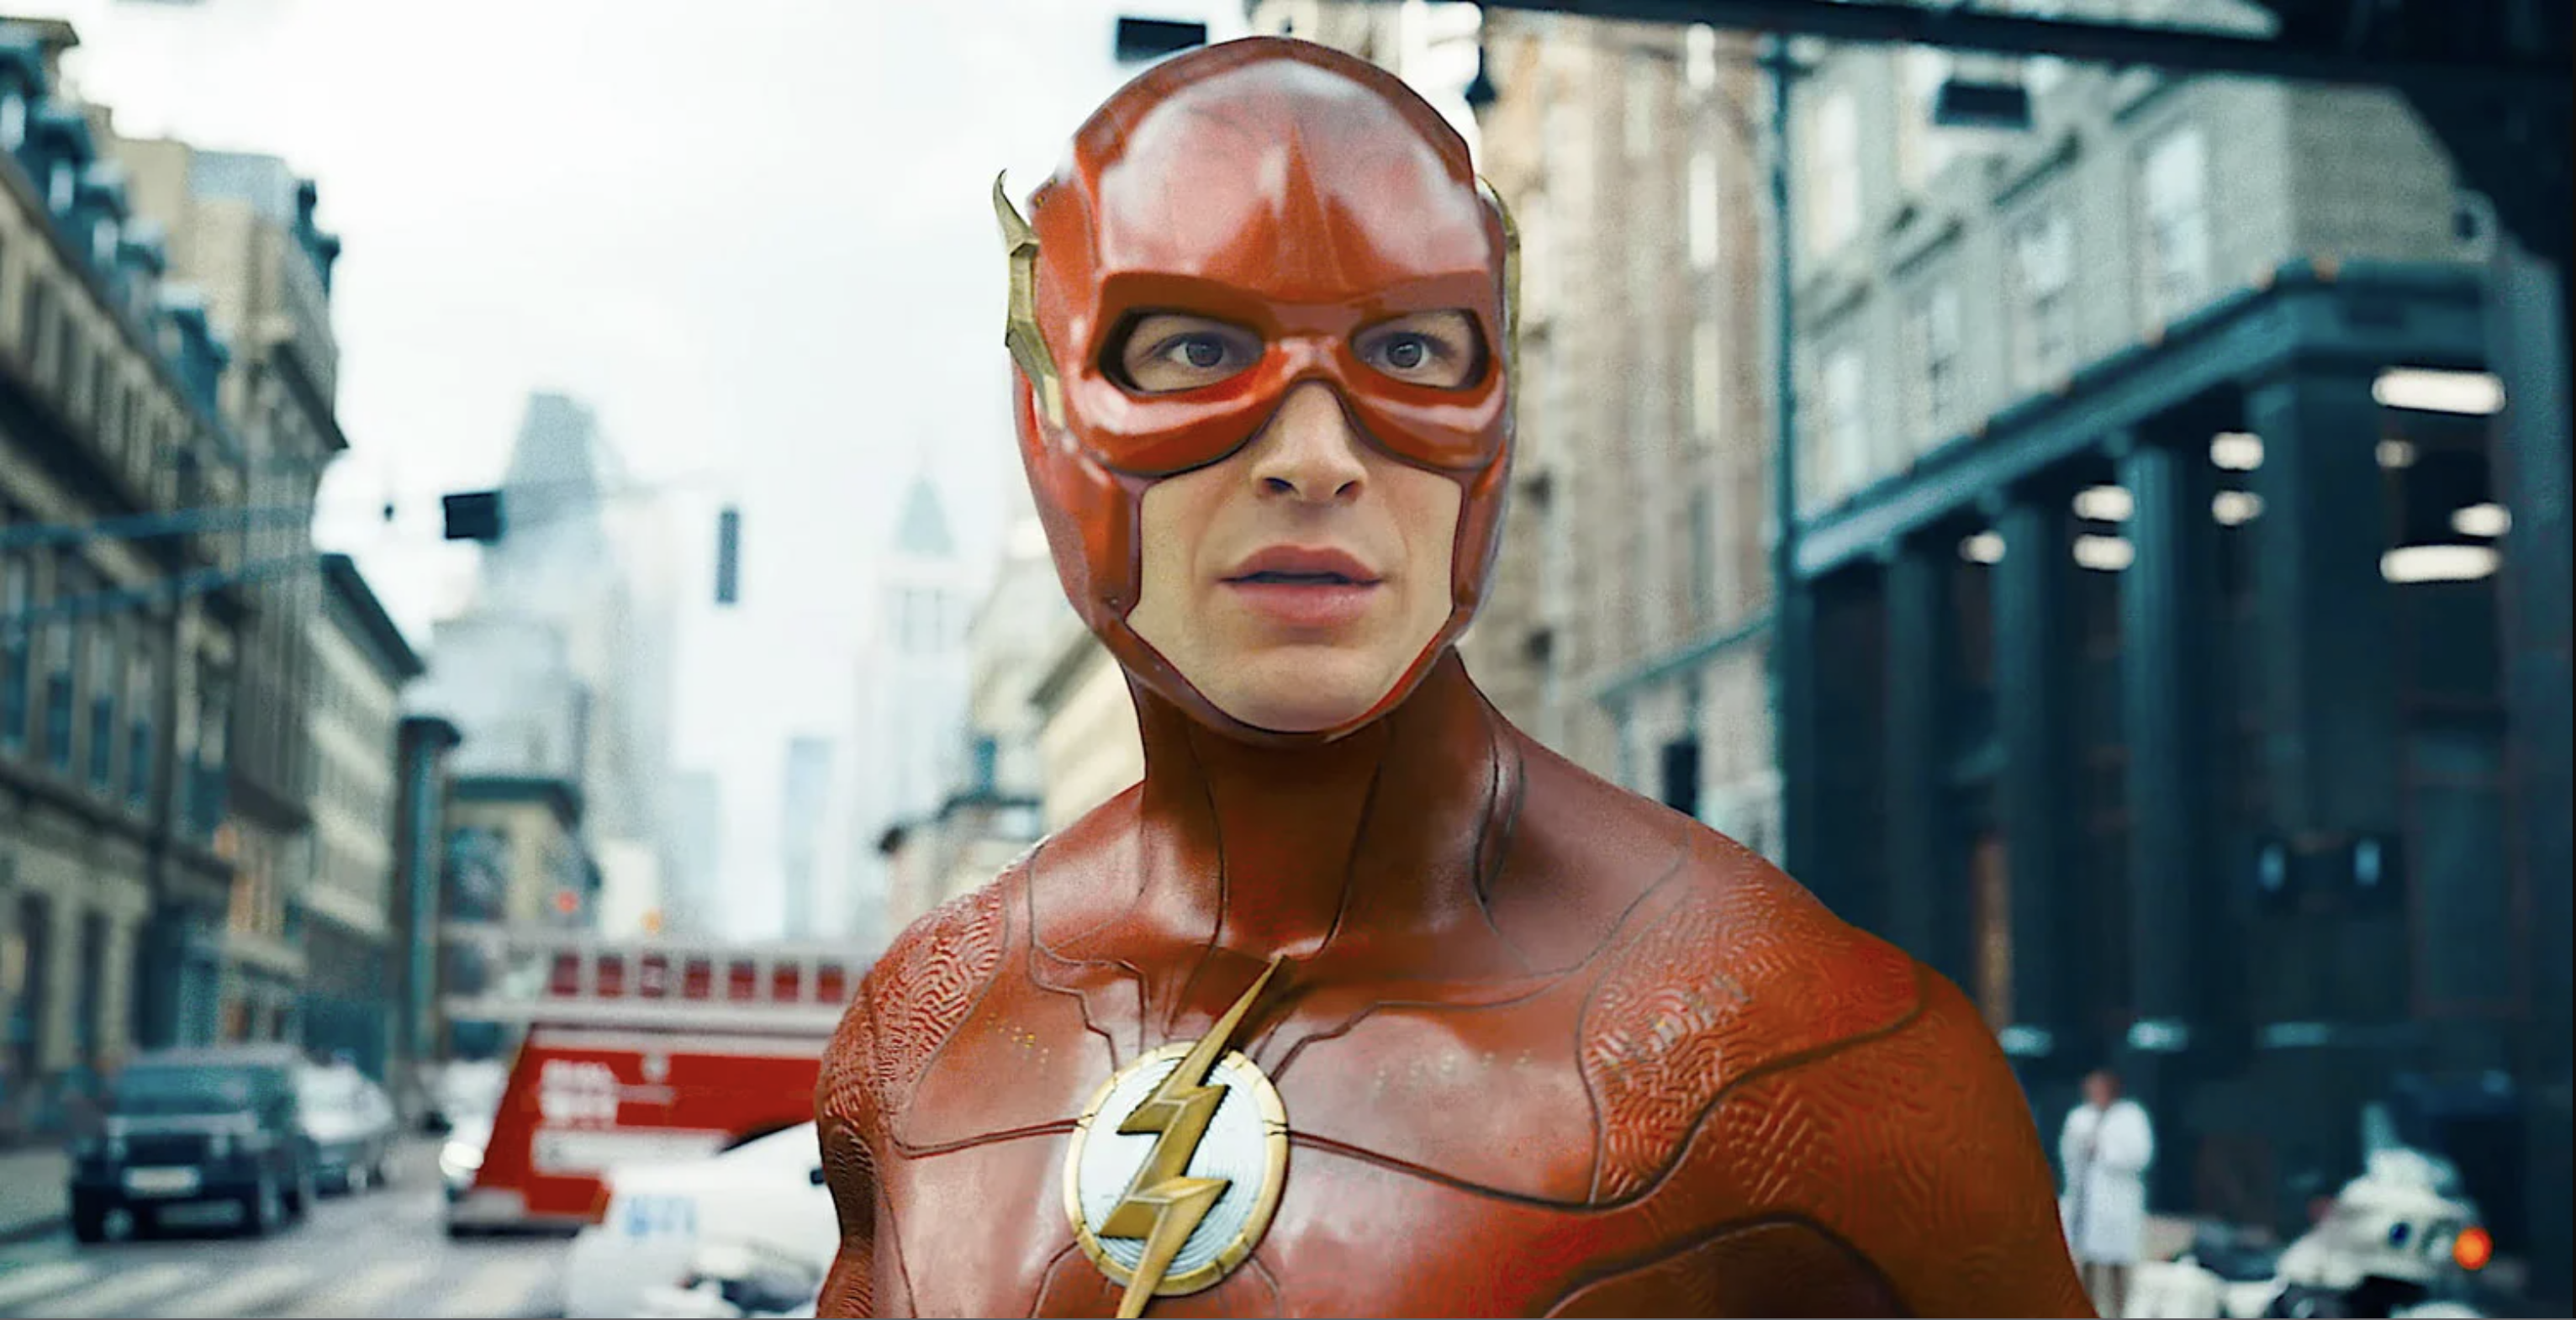 Join This Block Screening of DC Film "The Flash" on June 14 at Power Plant Mall